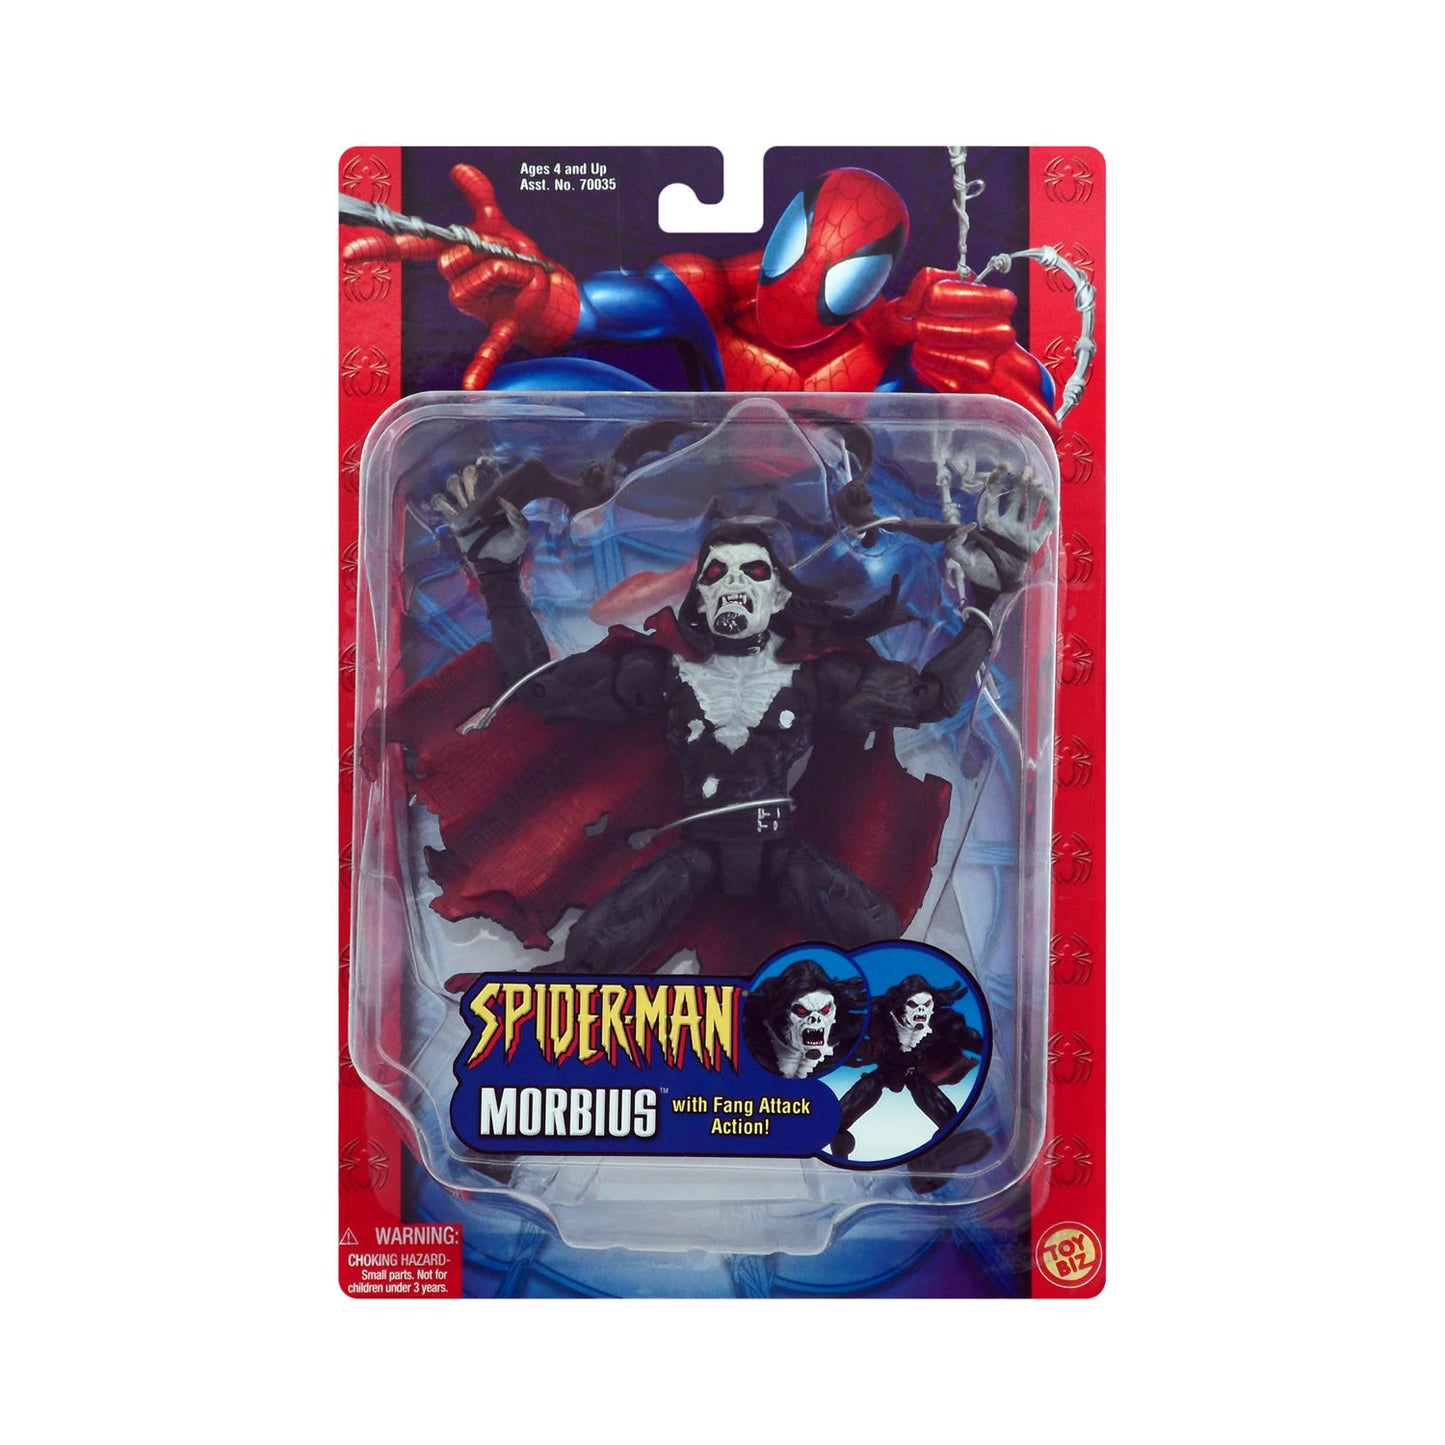 Morbius with Fang Attack Action from Spider-Man